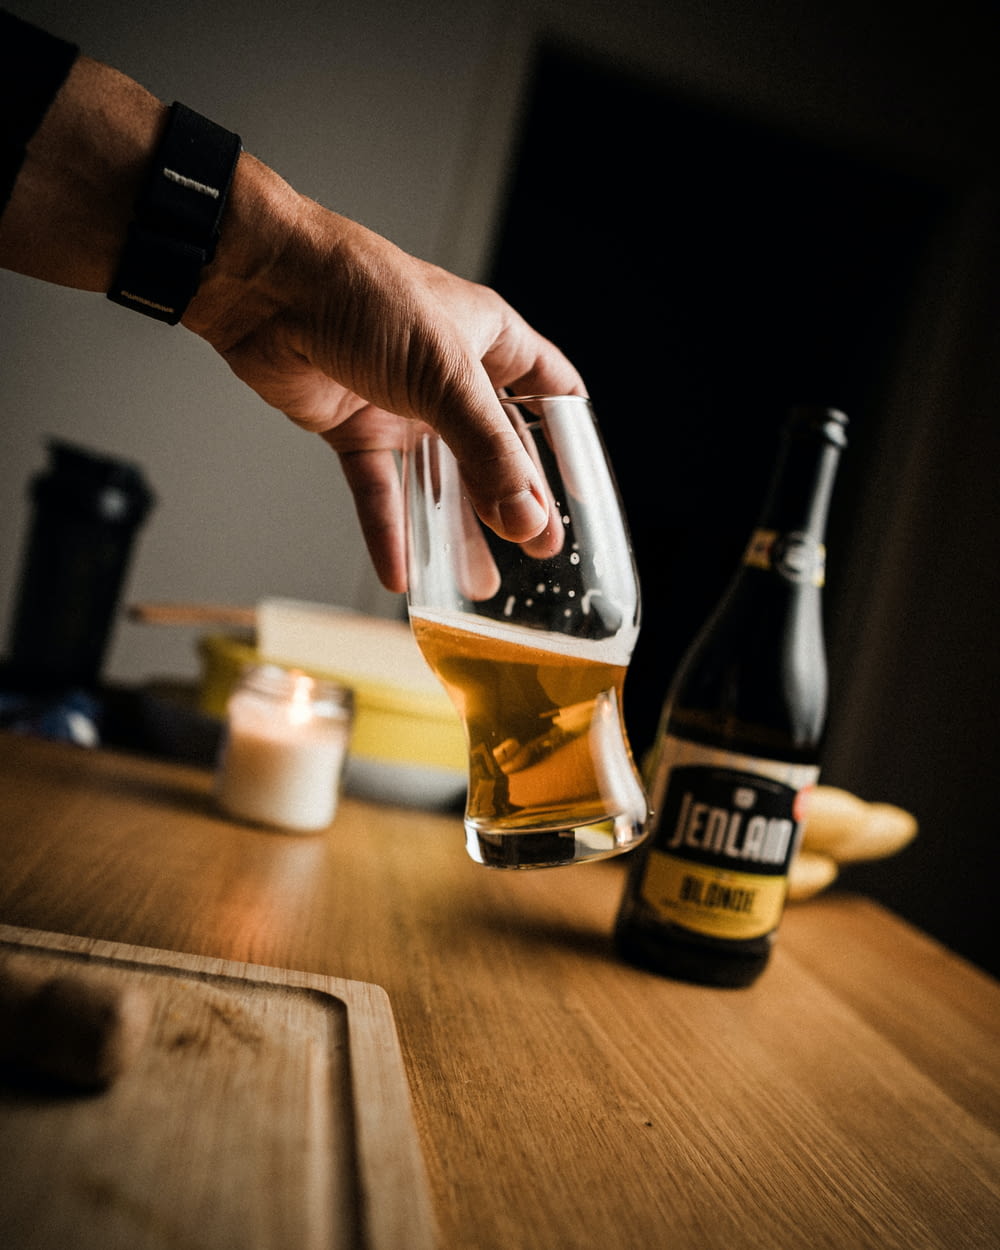 a person is pouring a beer into a glass